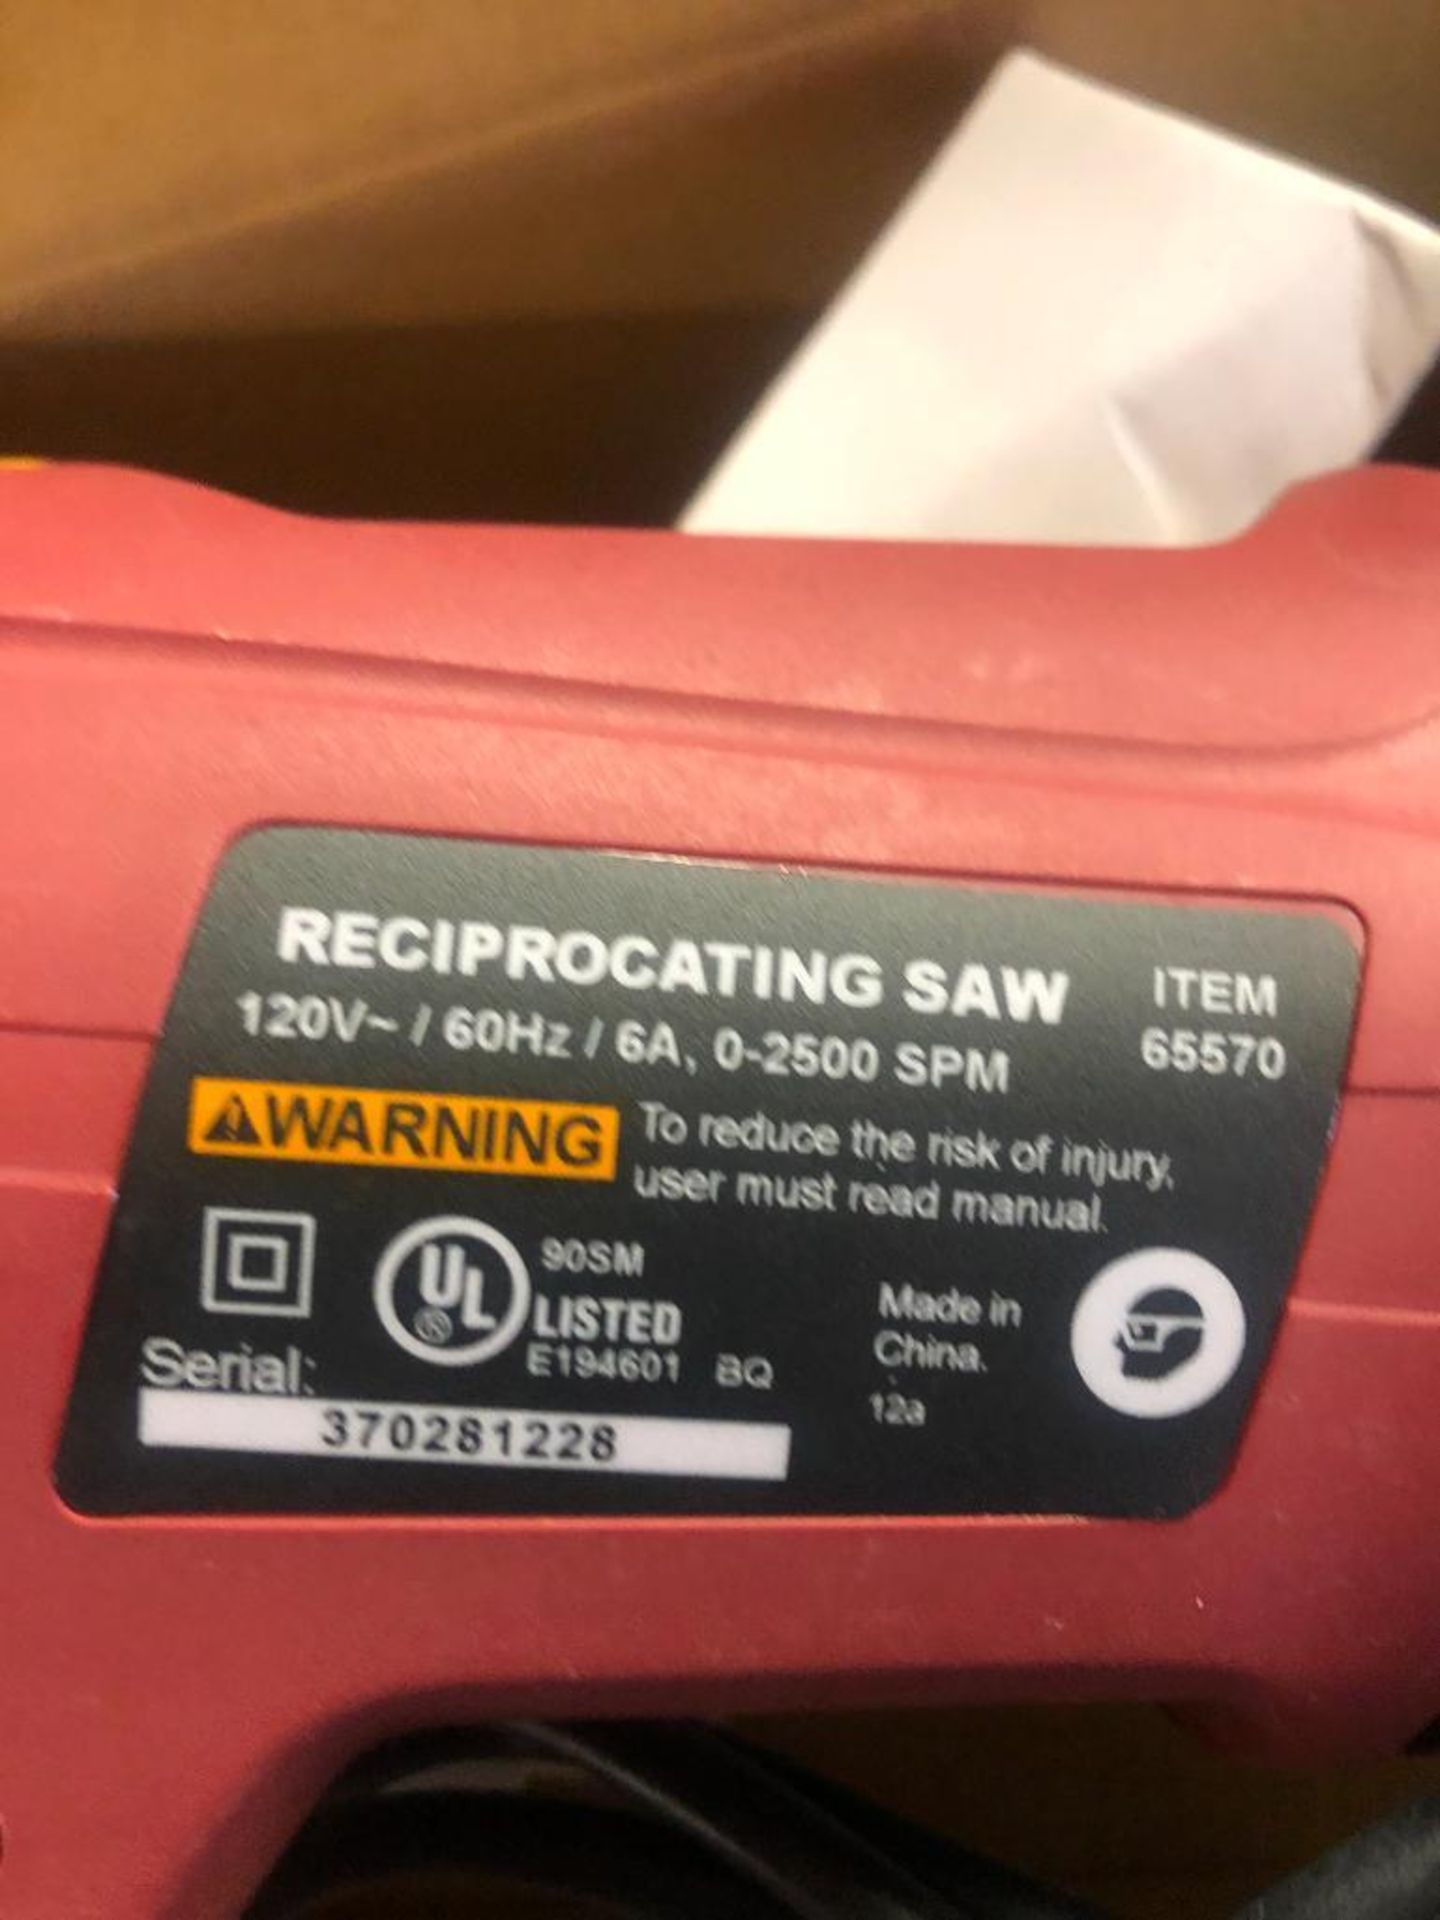 NEW CHICAGO ELECTRIC RECIPROCATING ELECTRIC SAW, W/ ROTATING HANDLE, 6 AMP, ITEM NUMBER 65570, S/N 3 - Image 3 of 4